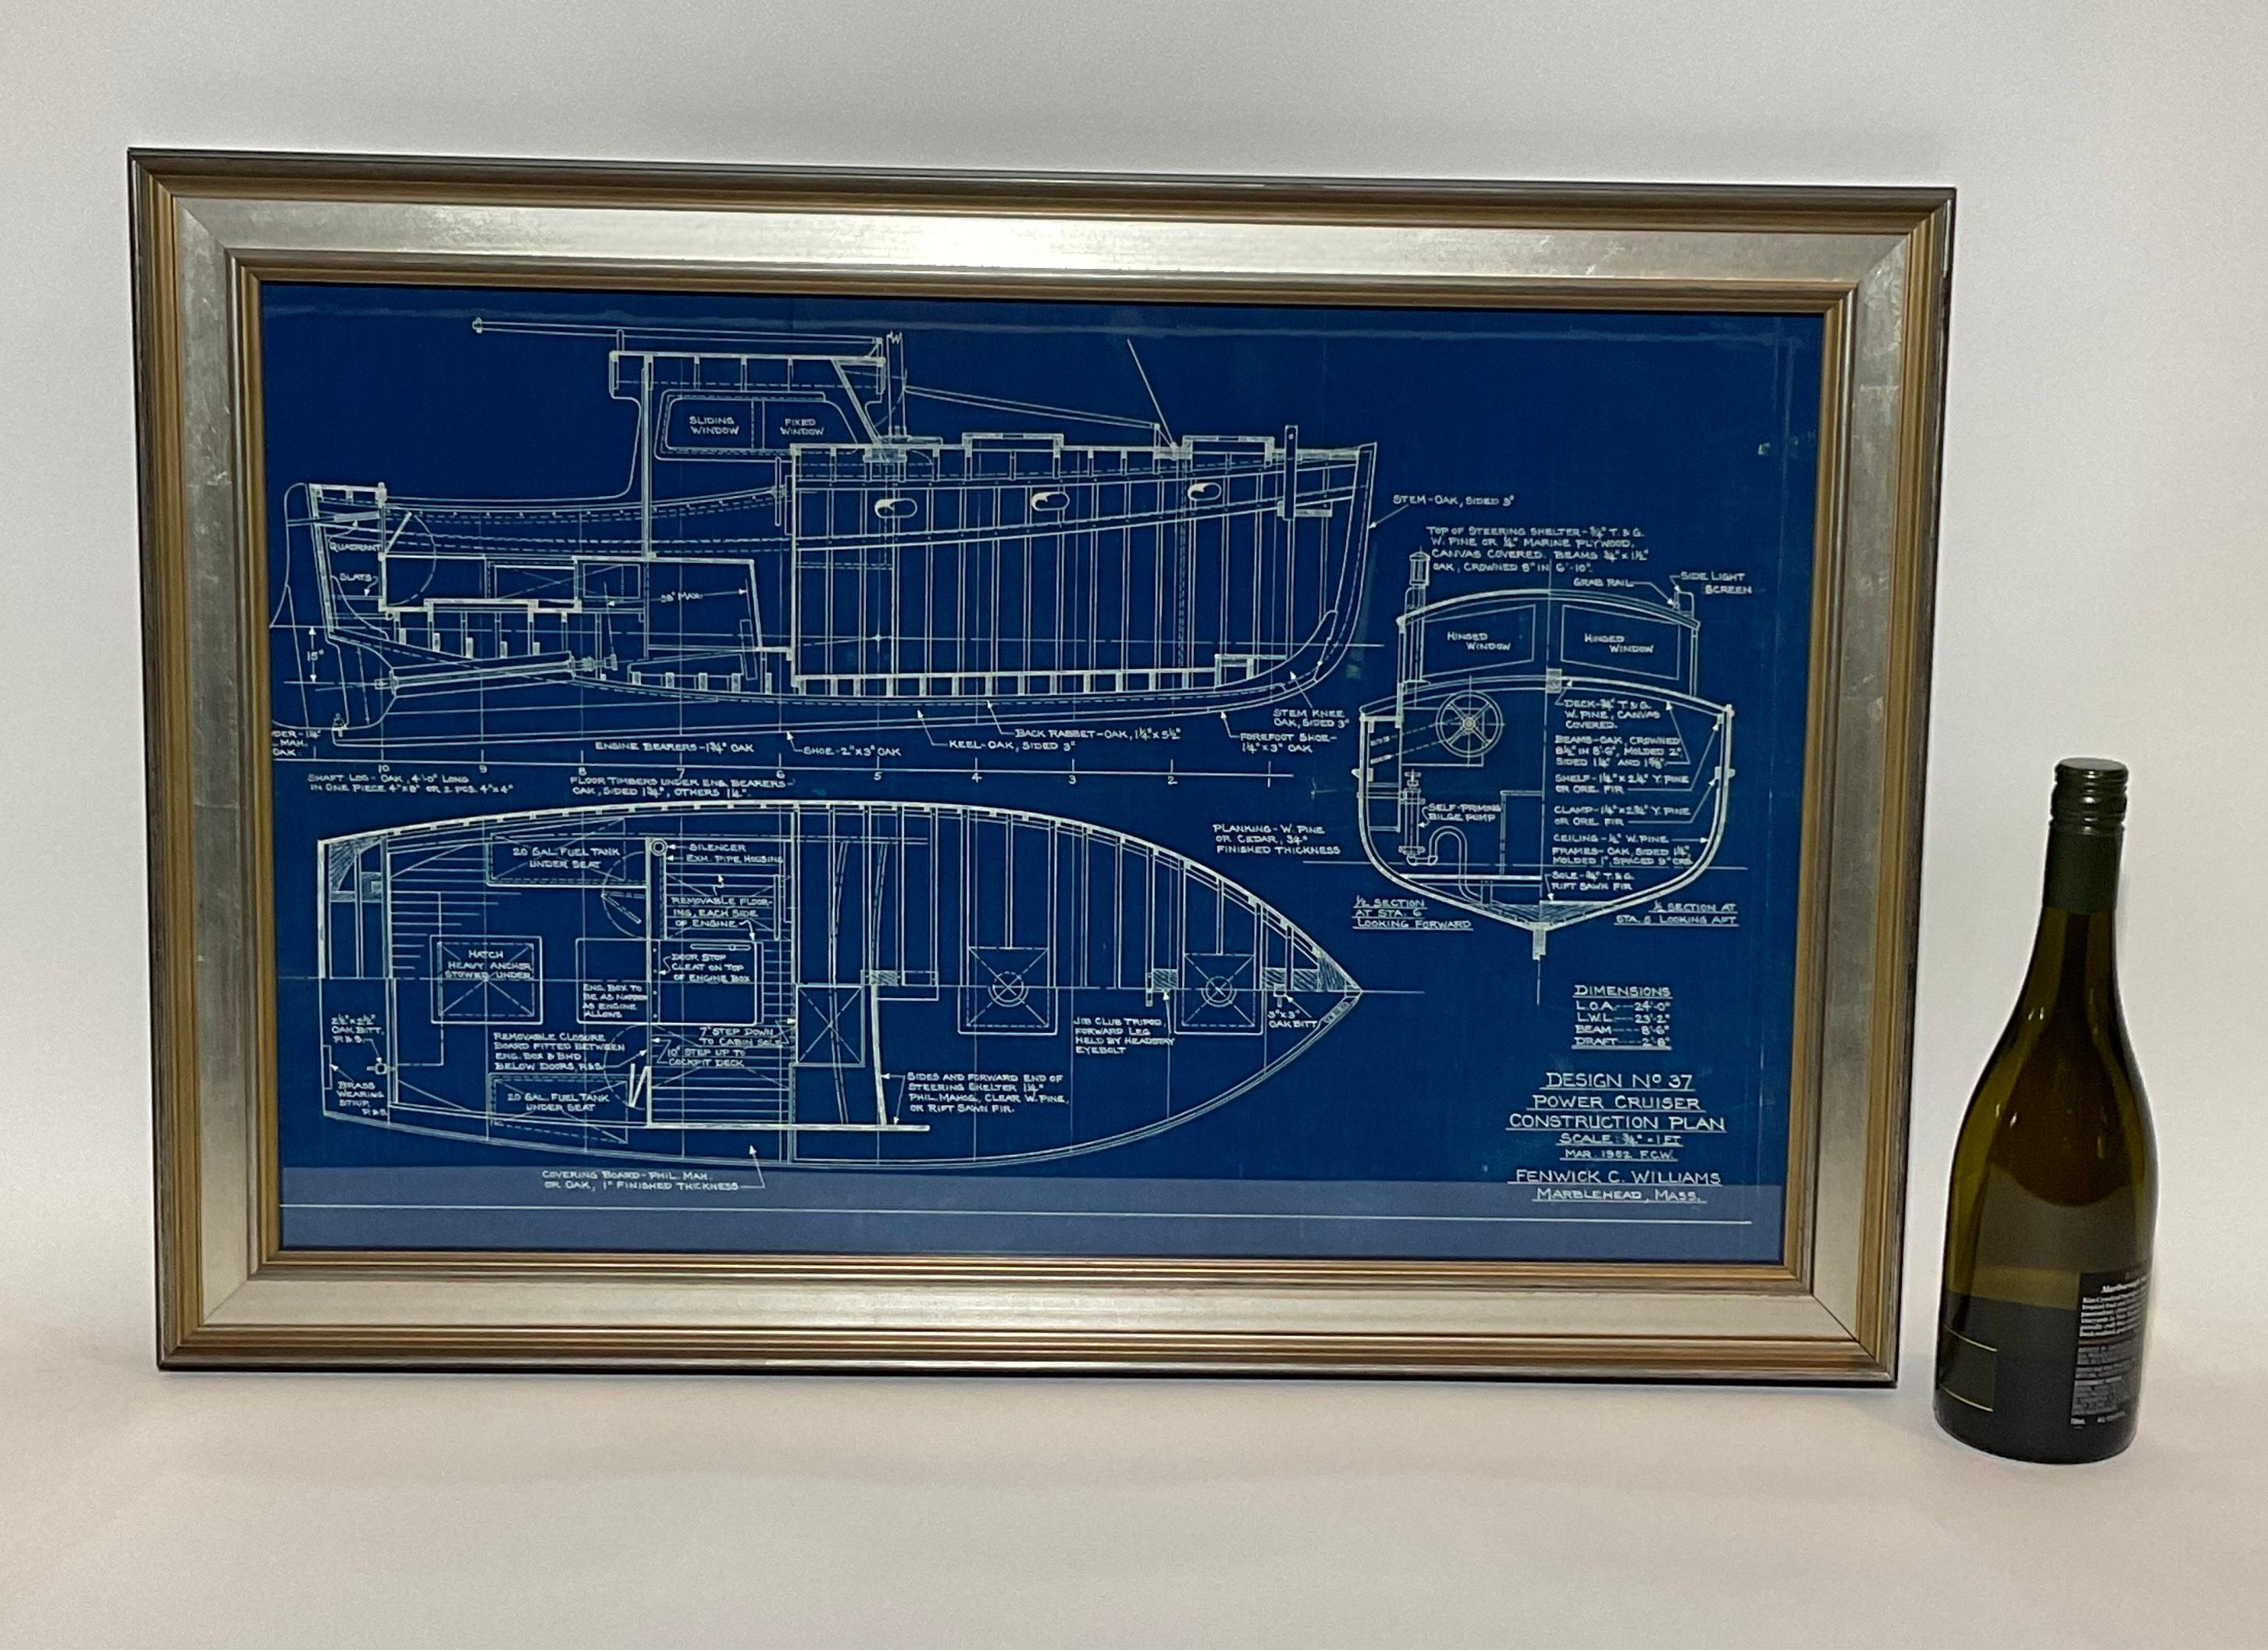 Yacht blueprint from the board of Fenwick C. Williams of Marblehead Mass. Dated March 1952. Length overall is twenty four feet. This is a highly detailed and interesting drawing. It shows hatches, hardware, windows, wheel, beams, planks,